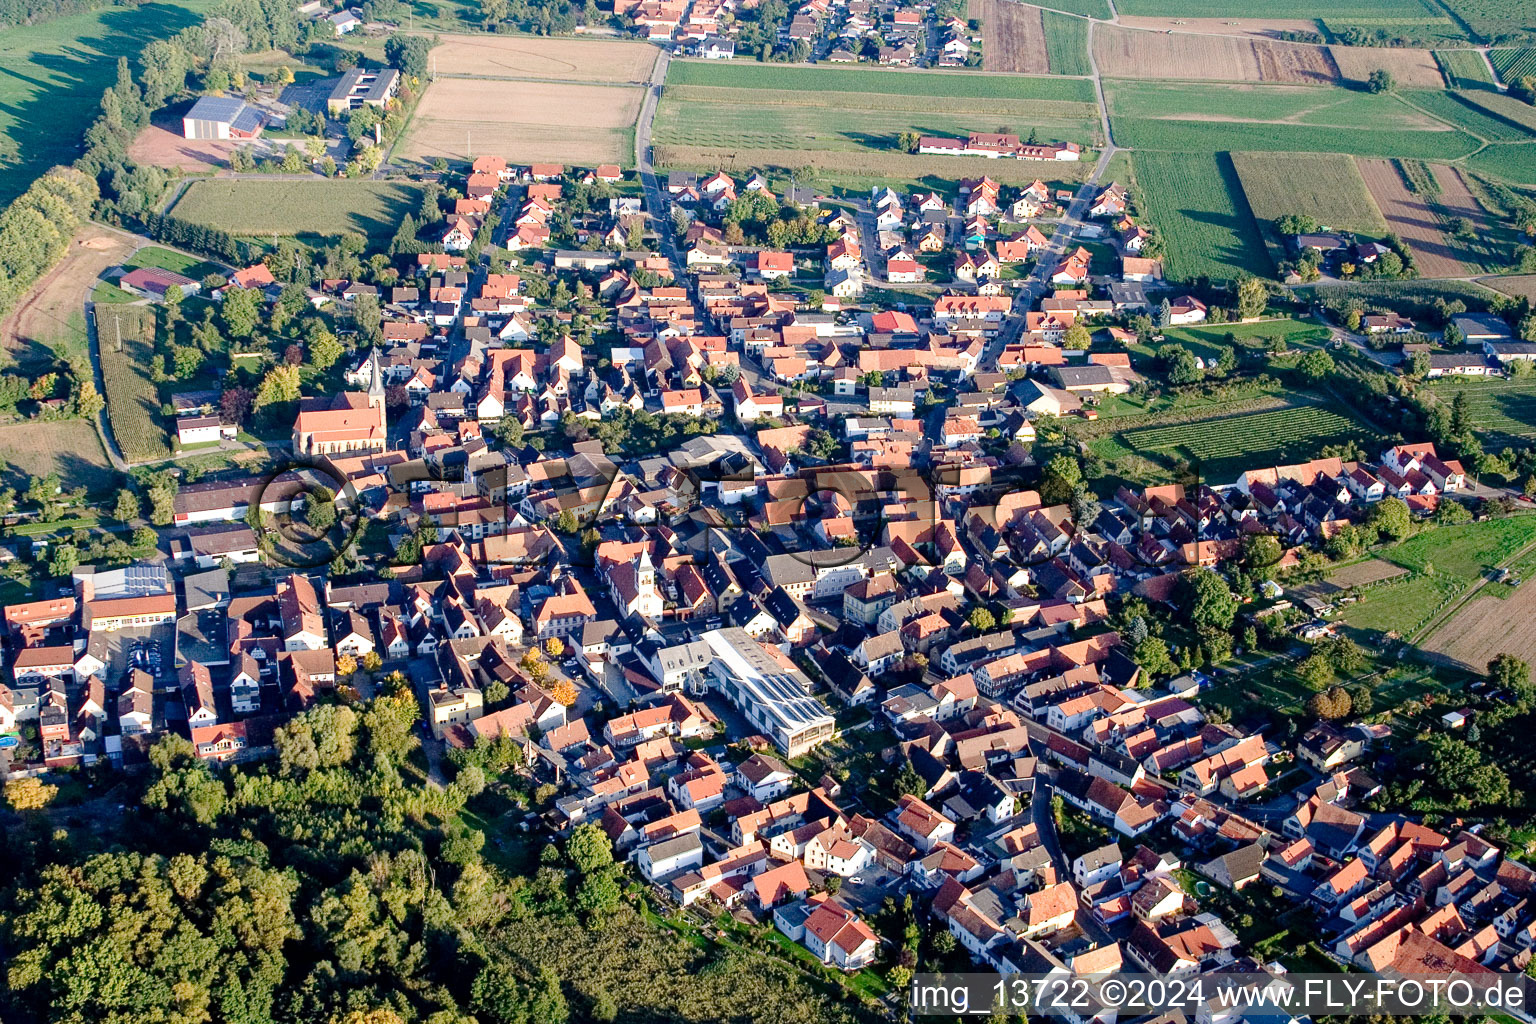 Aerial view of Town View of the streets and houses of the residential areas in the district Ingenheim in Billigheim-Ingenheim in the state Rhineland-Palatinate